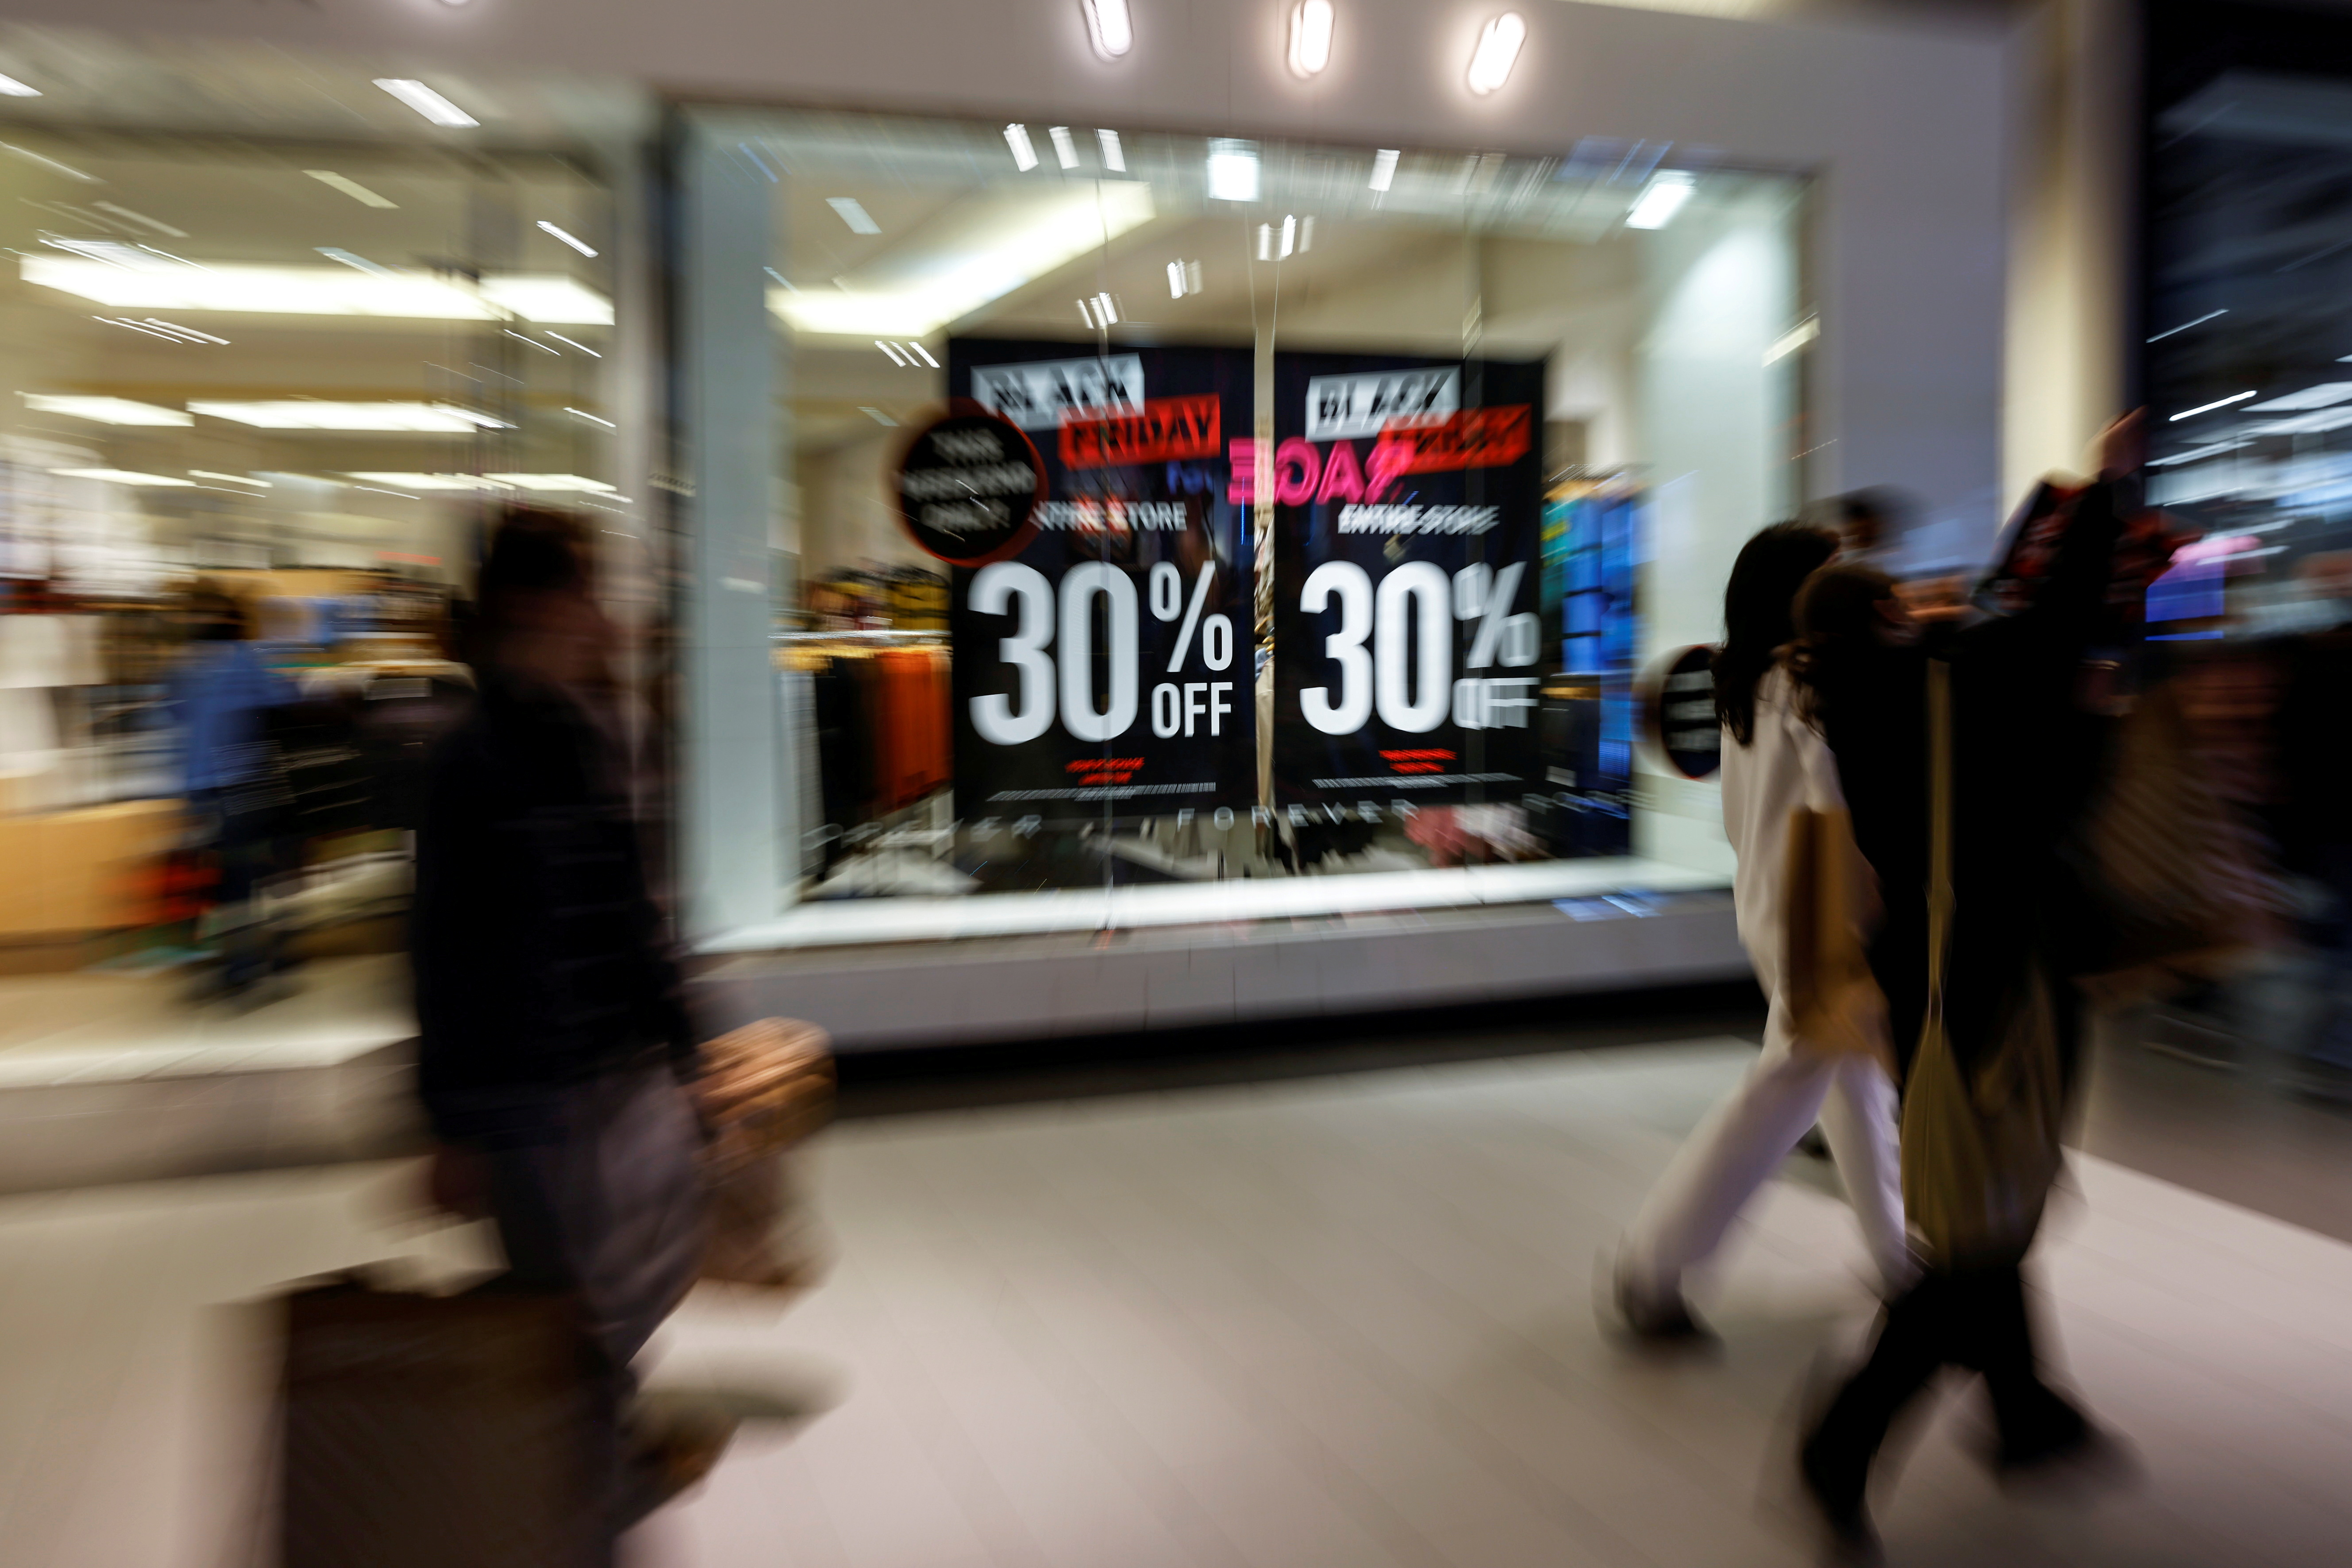 Pre-Black Friday sales remain appealing even during a pandemic